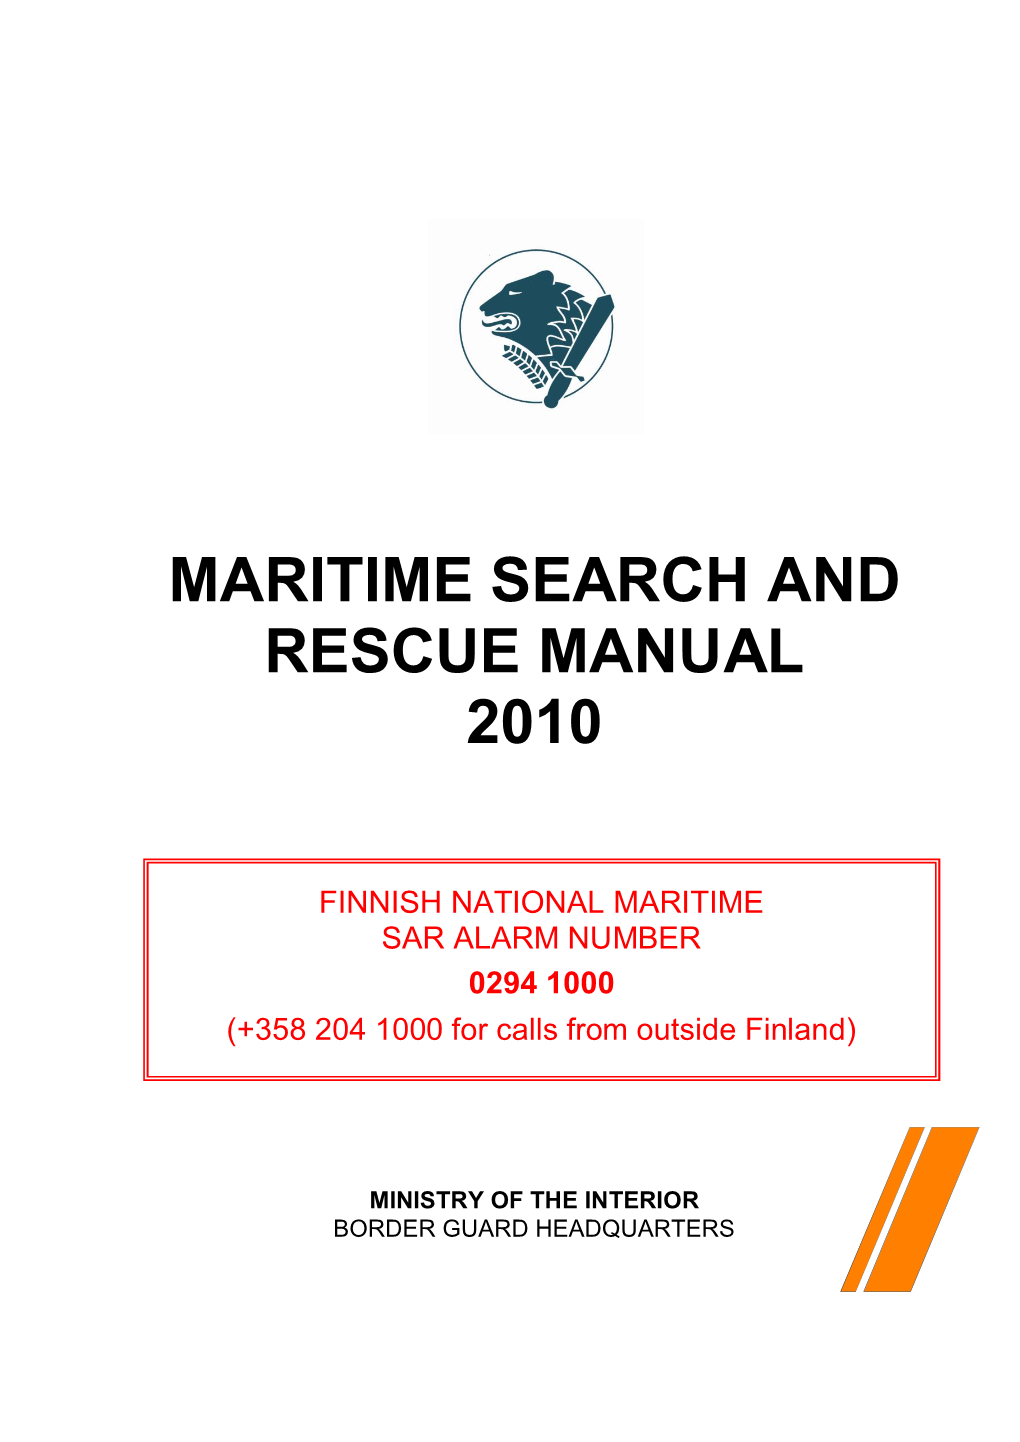 Maritime Search and Rescue Manual 2010